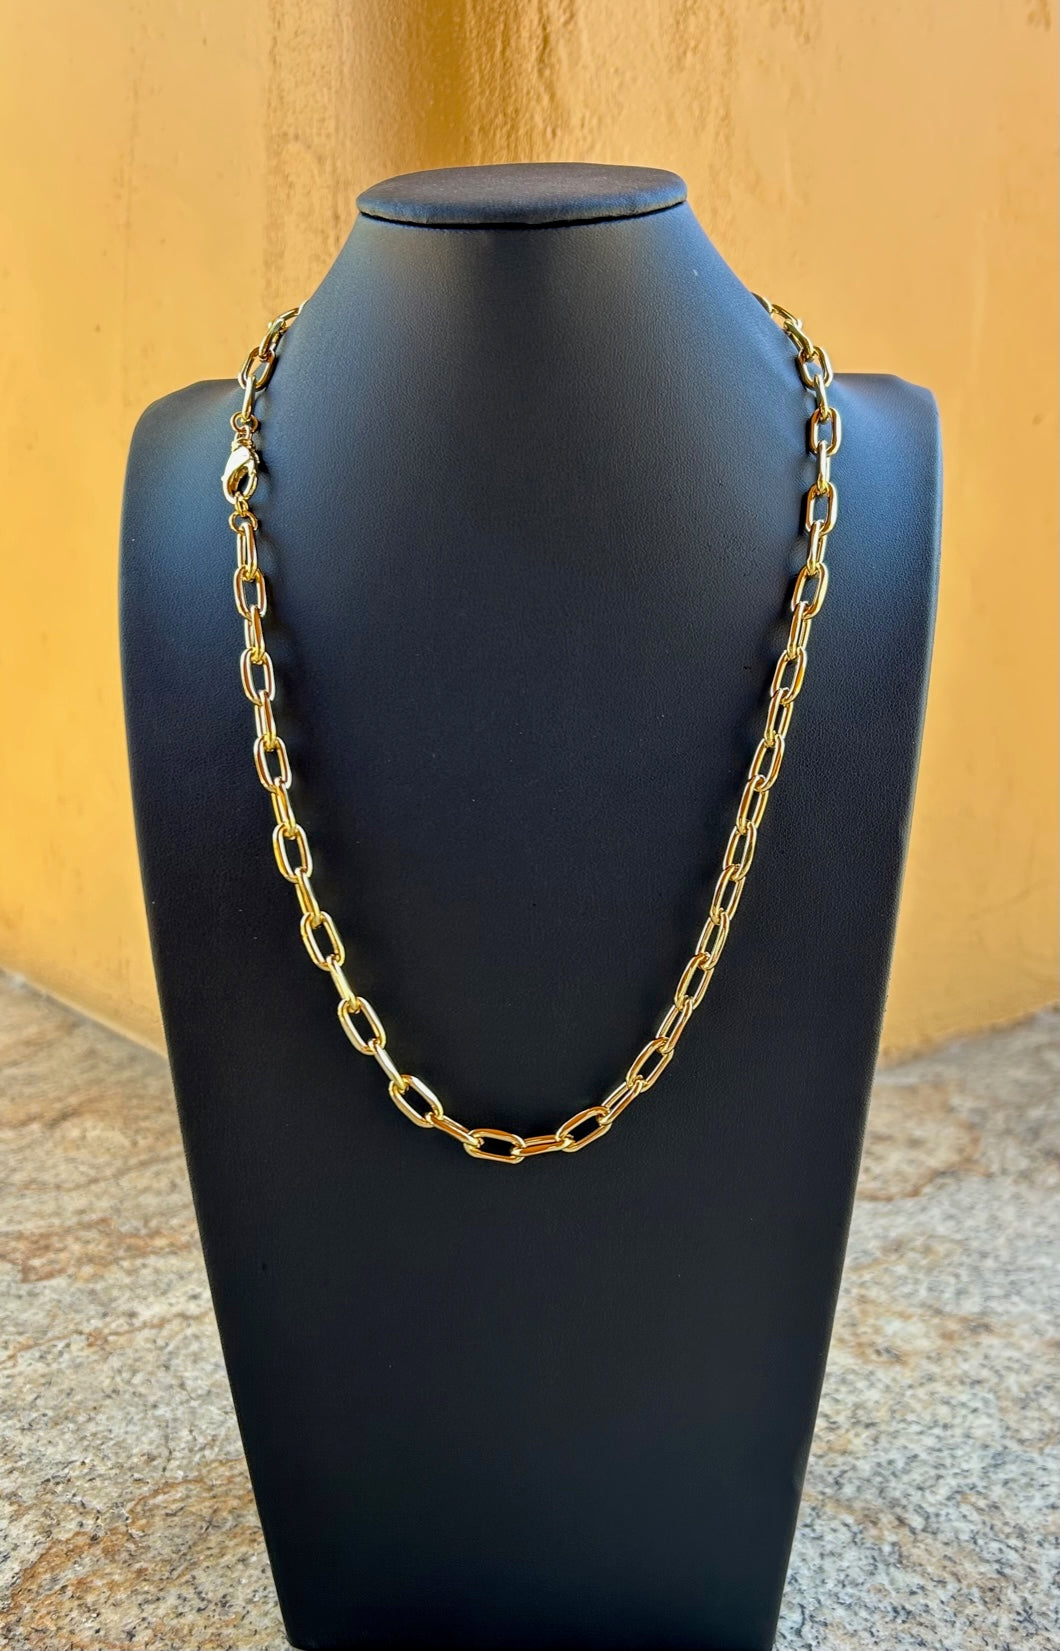 Necklace - 14K gold filled chunky paperclip chain with lobster claw